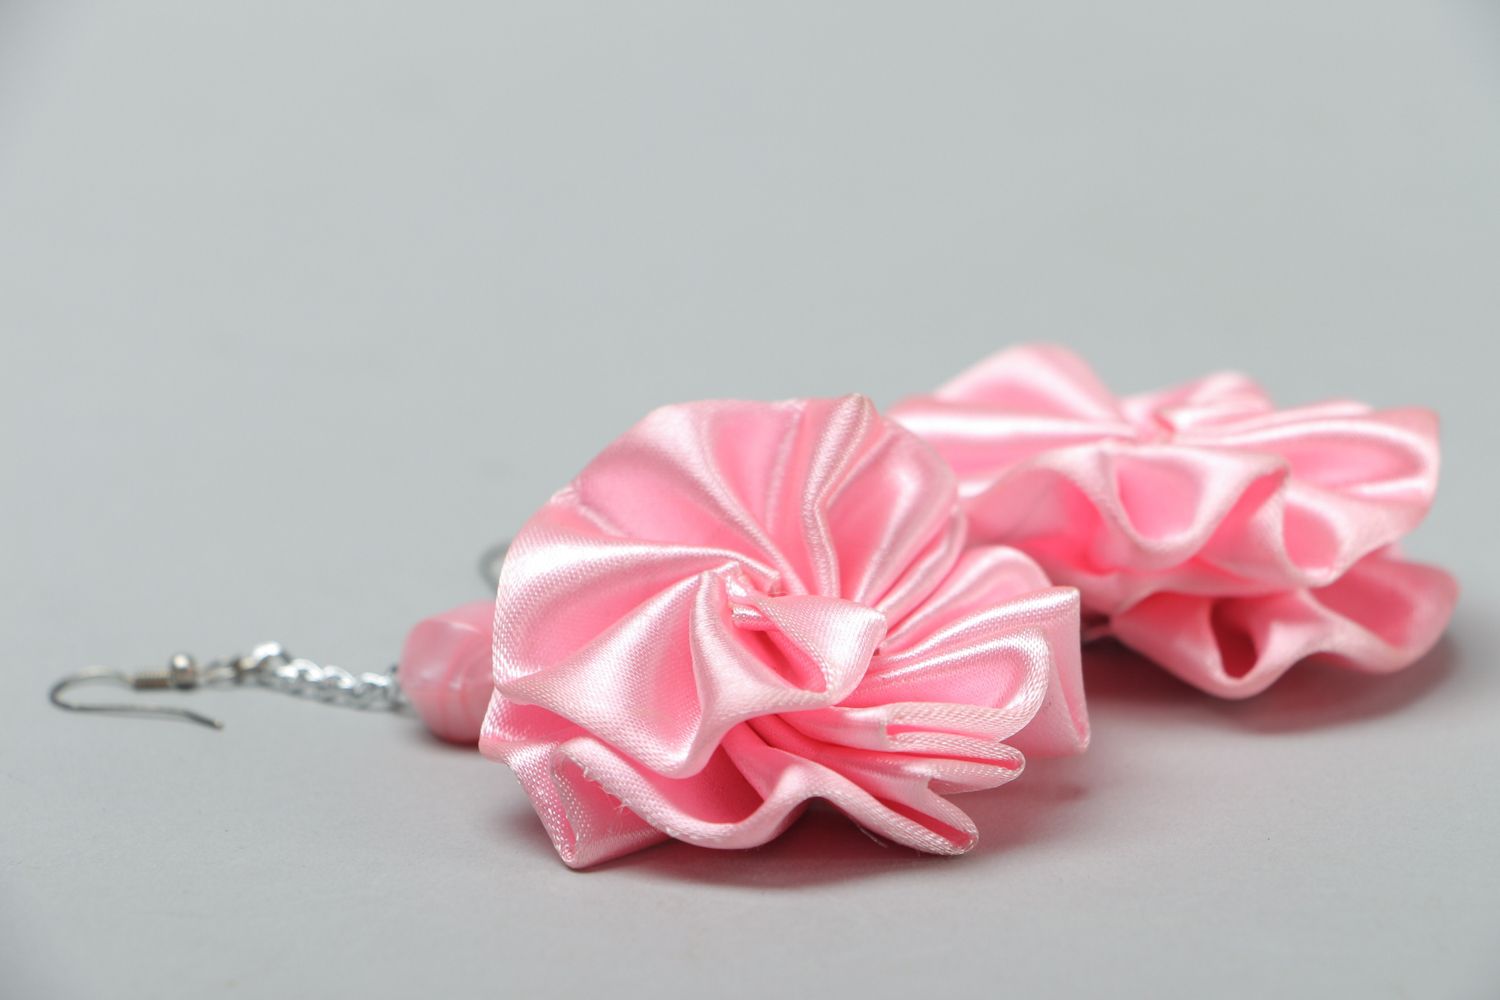 Tender pink floral earrings made of satin photo 2